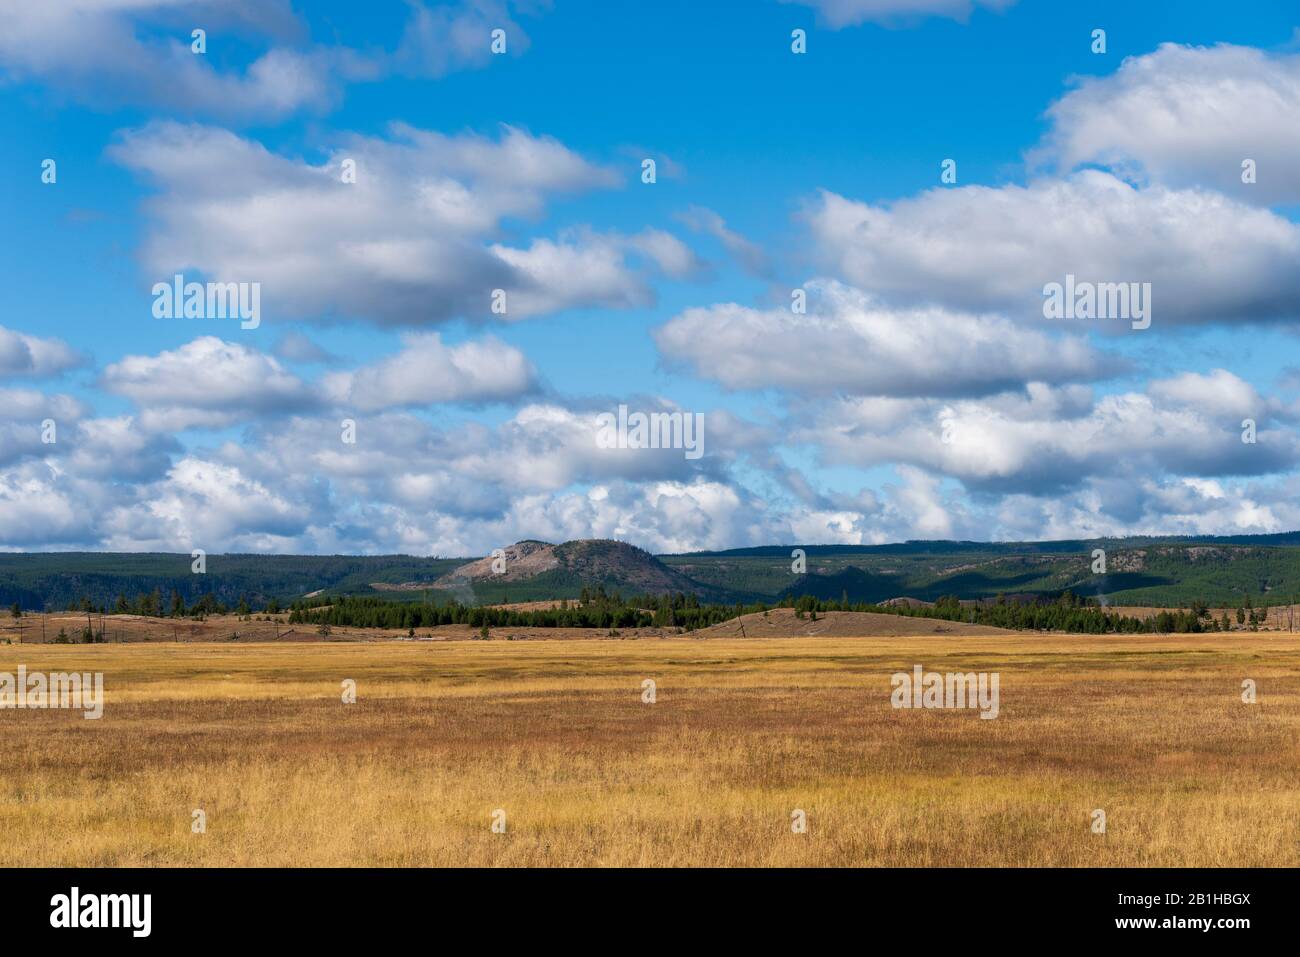 Golden grass fields with green forest and hills beyond under a peaceful bright blue sky with white fluffy clouds. Stock Photo